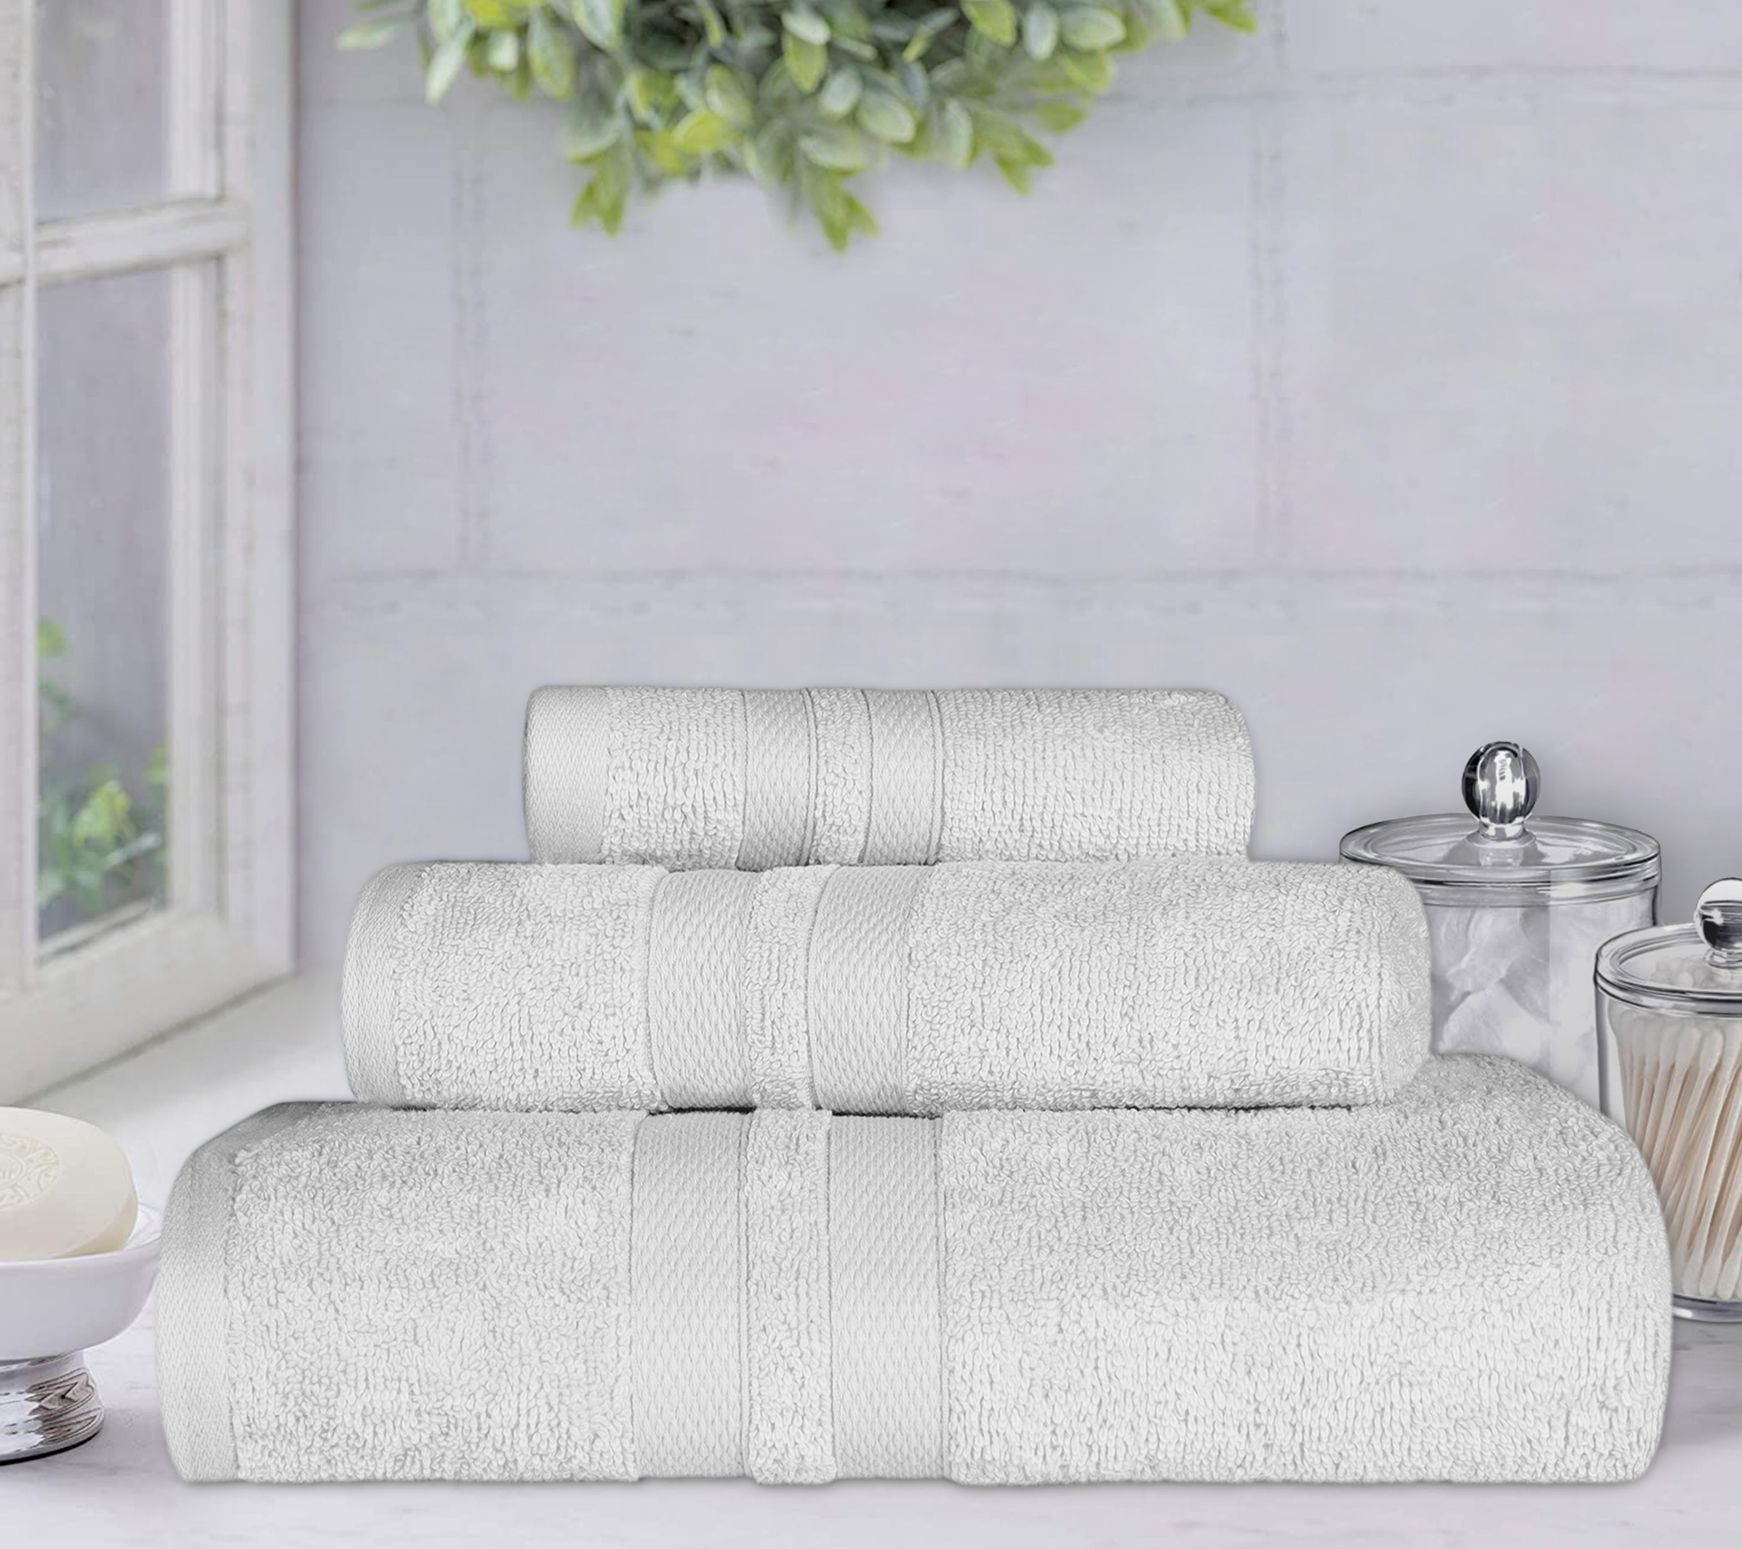 Superior Combed Cotton Plush Solid Hand Towels Set of 6, Grey, Gray